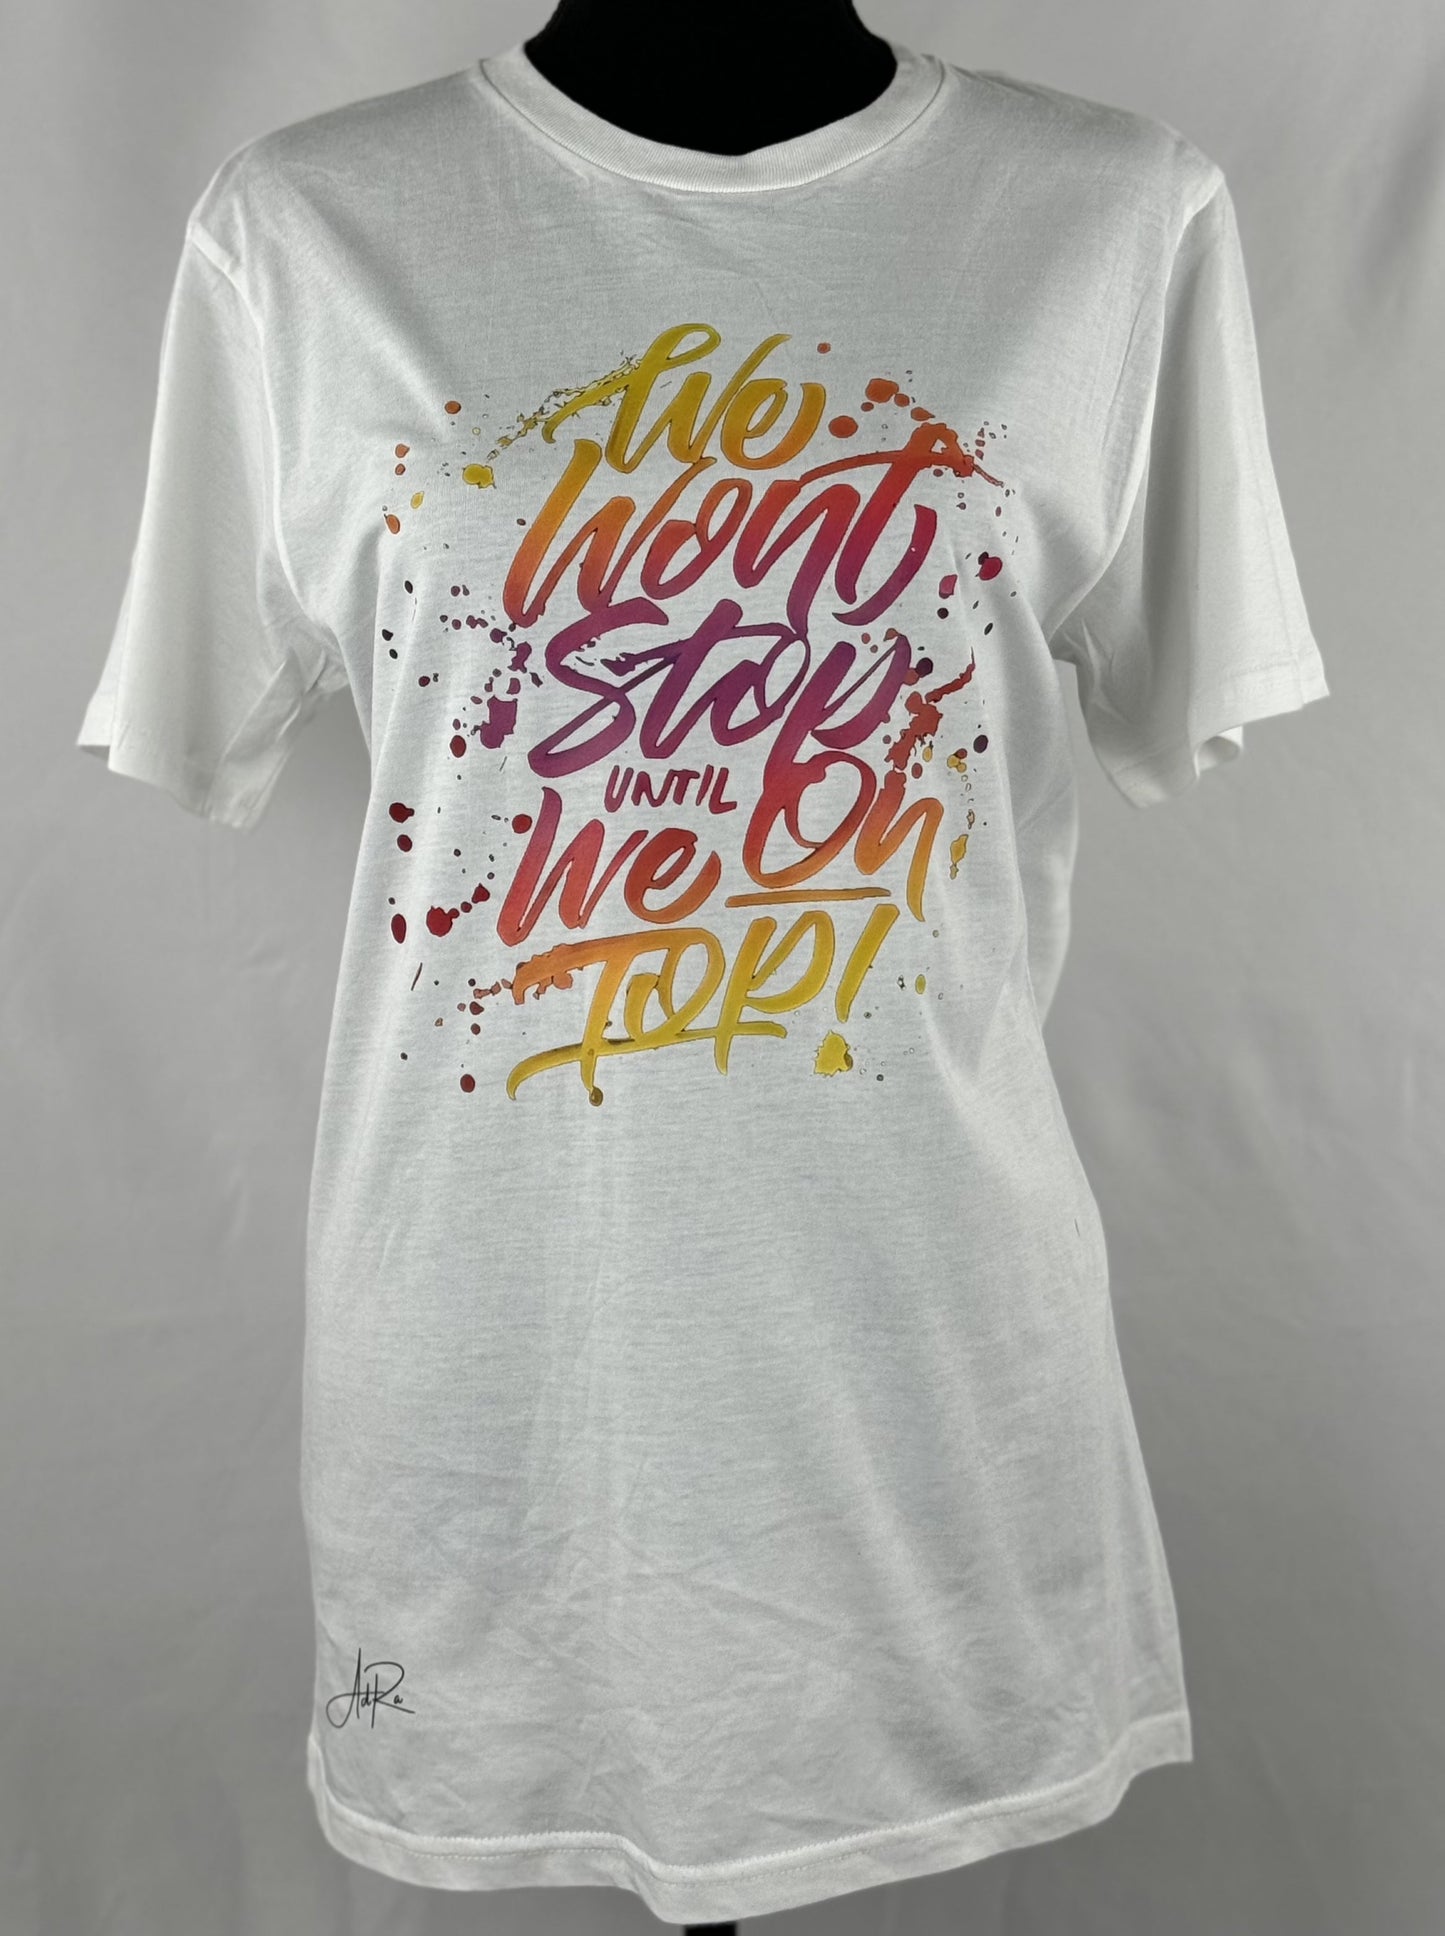 "We Won't Stop Until We TOP!" Tee - For the Ambitious Woman | AdRa Apparel